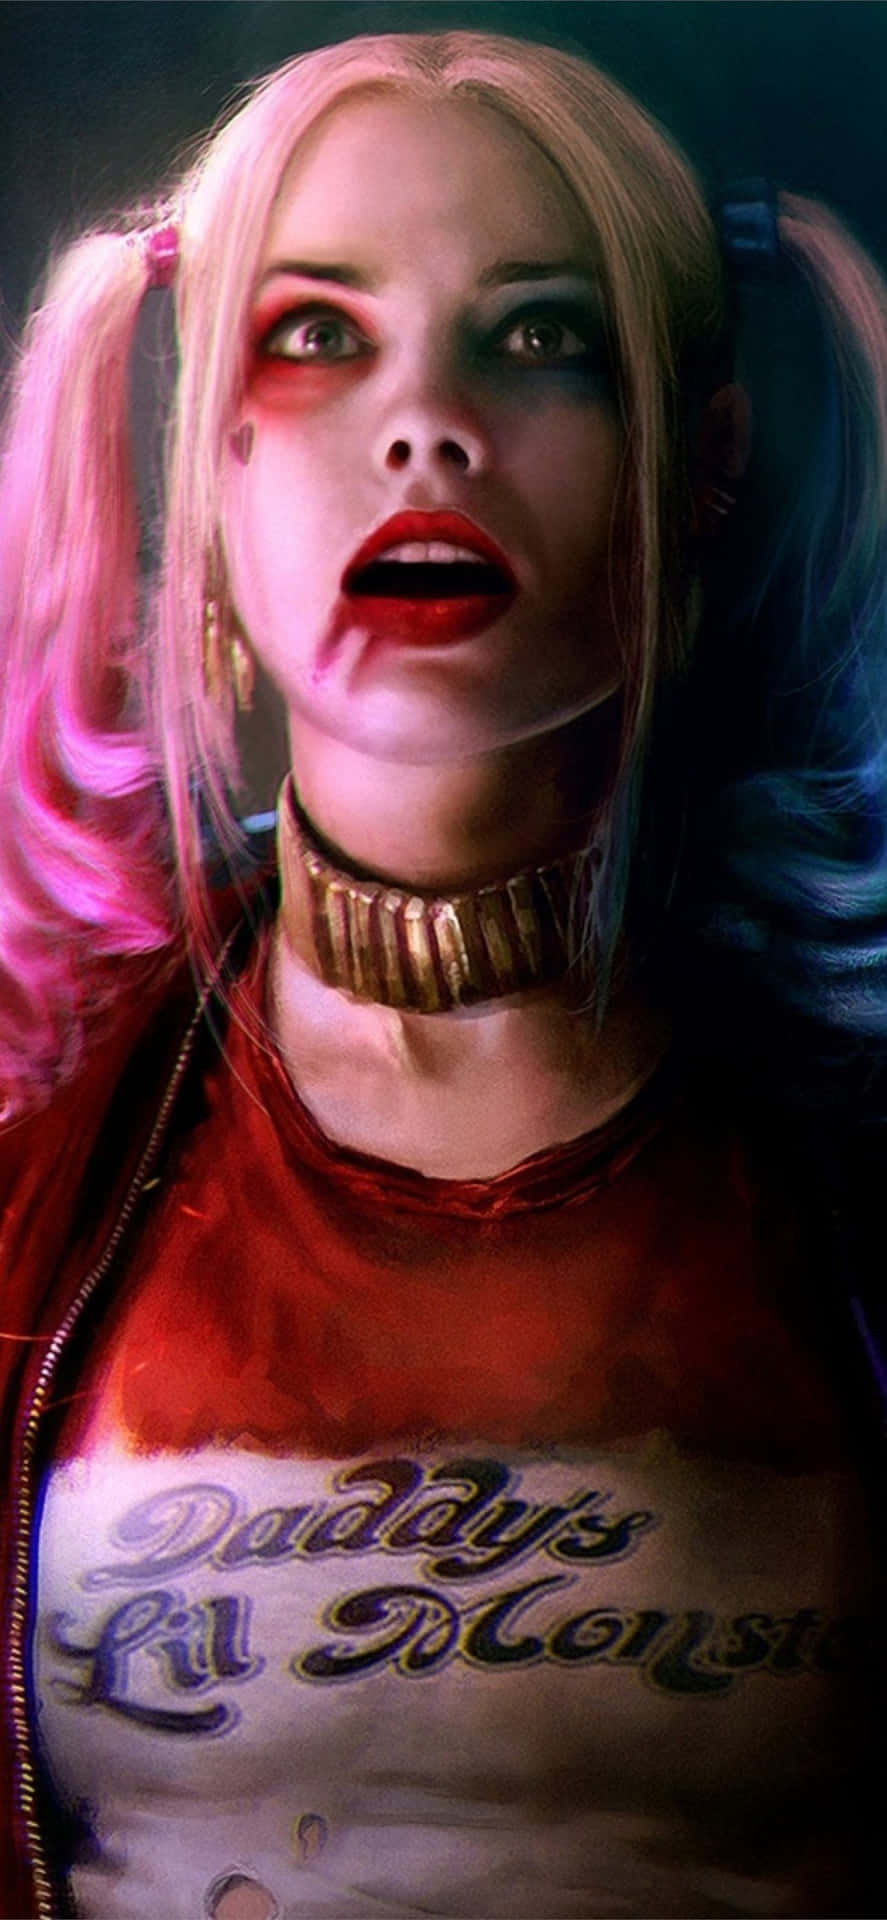 Margot Robbie as Harley Quinn from Suicide Squad Wallpaper